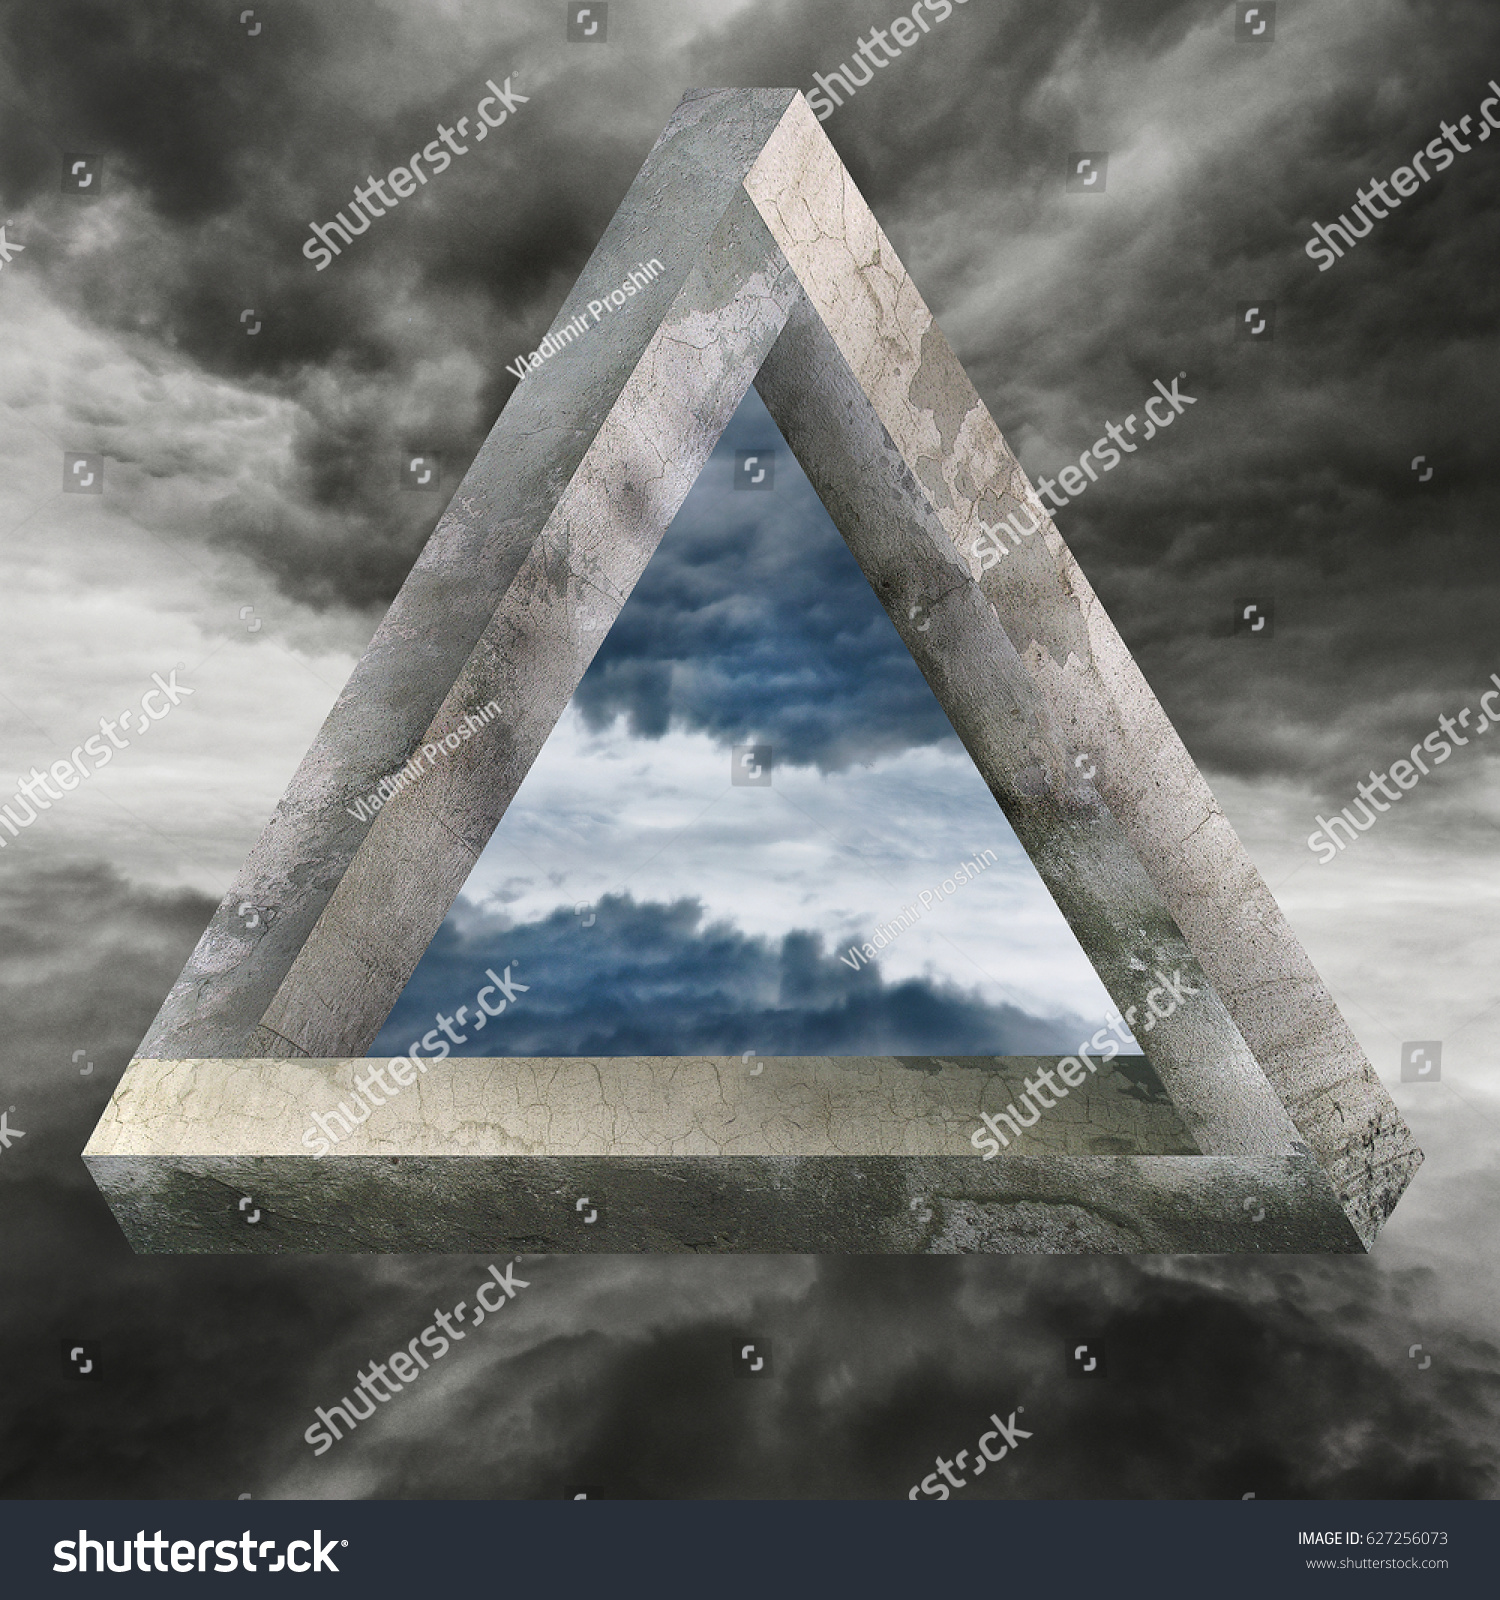 Allegory of the Mobius figure. Stone figure of Mobius and dark roots and Stormy sky. #627256073